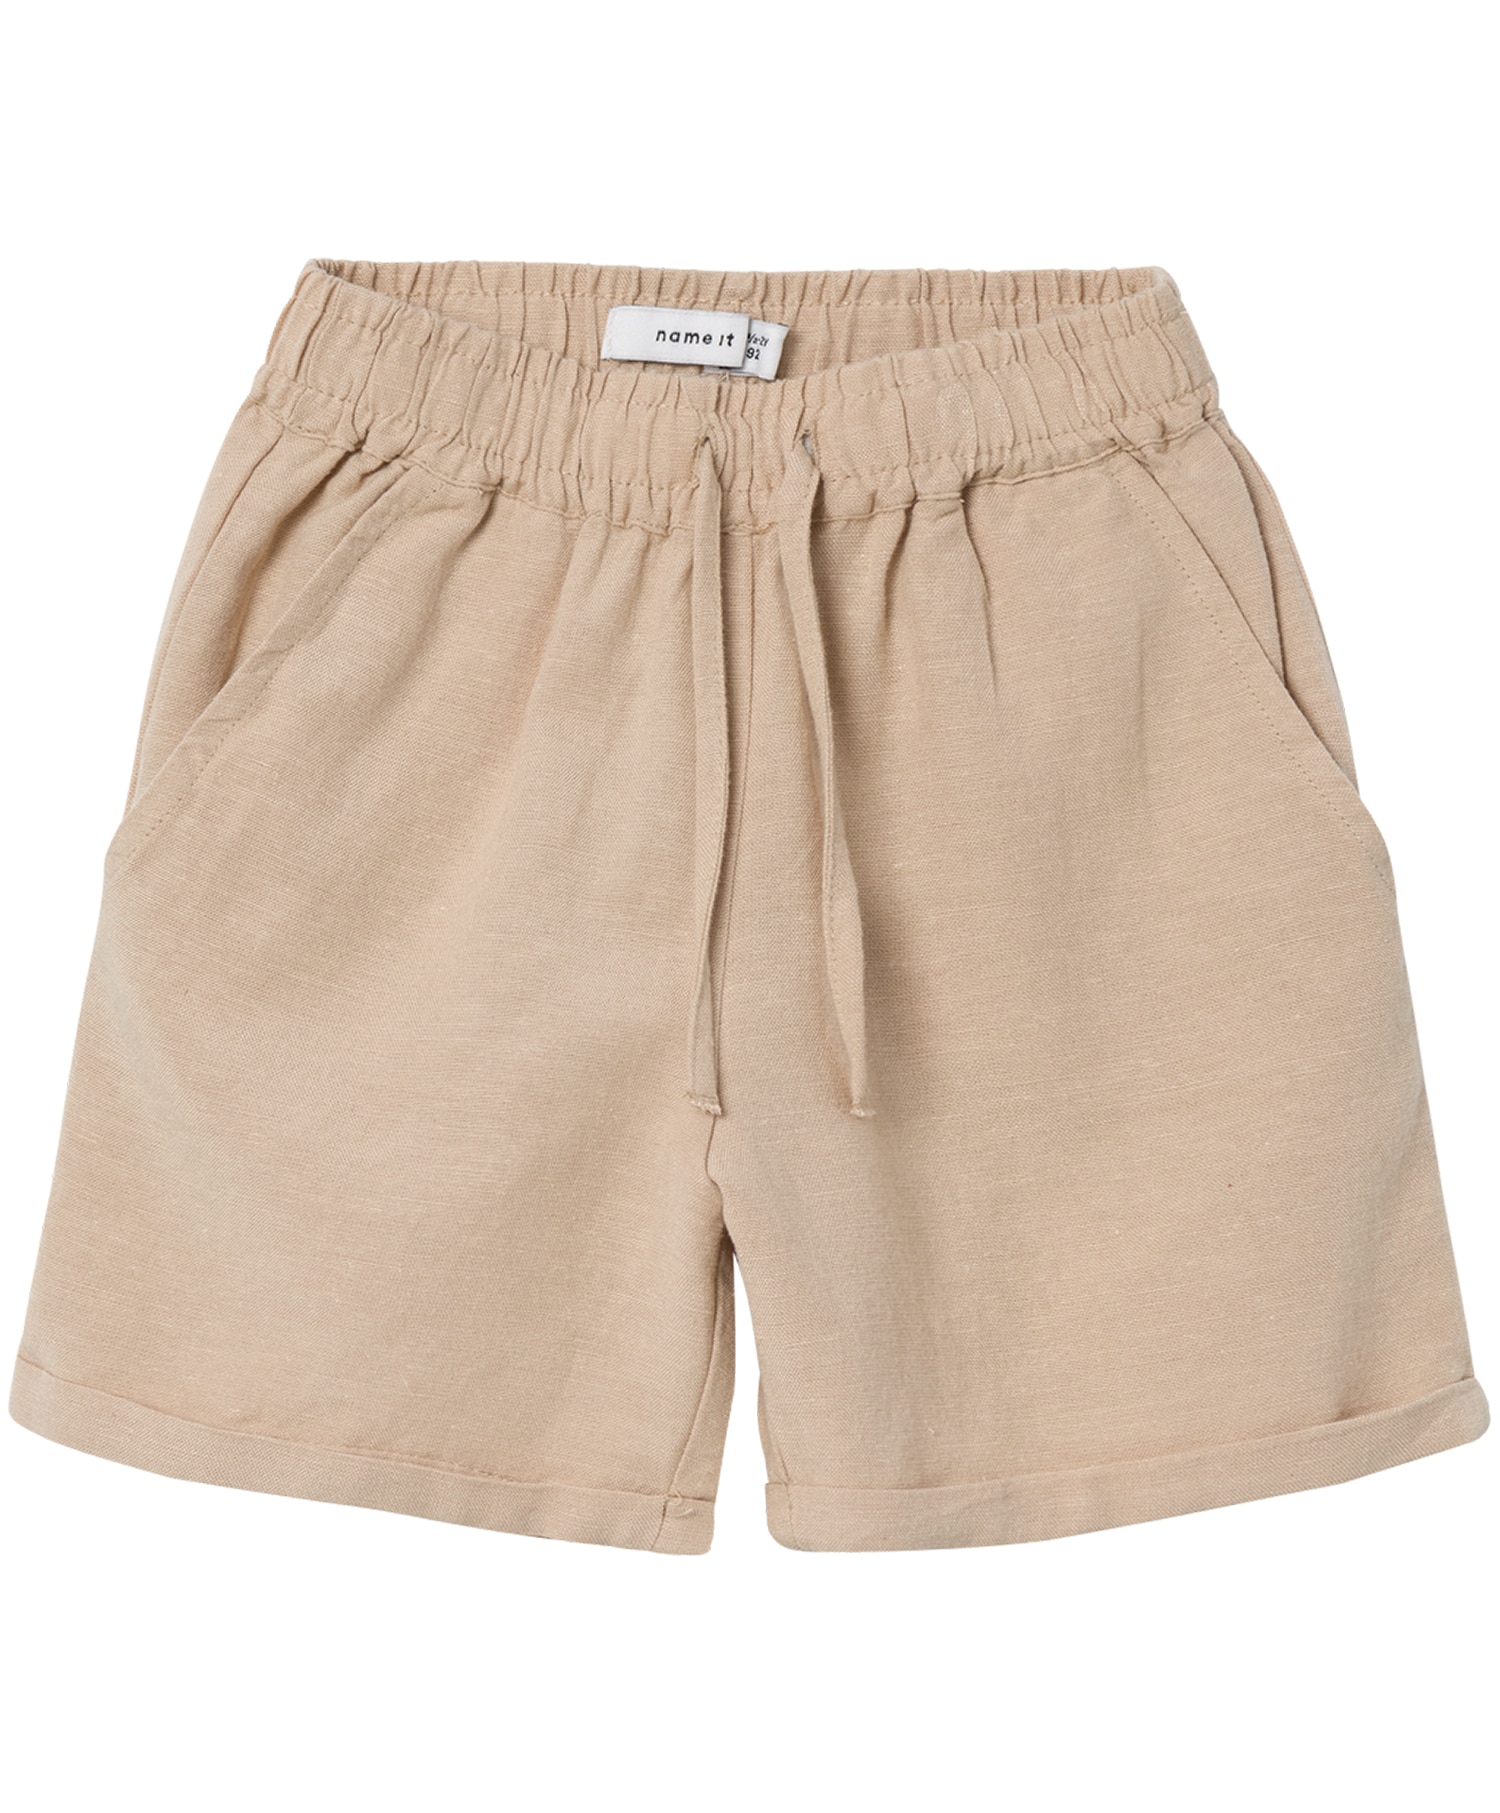 Name it  FAHER shorts